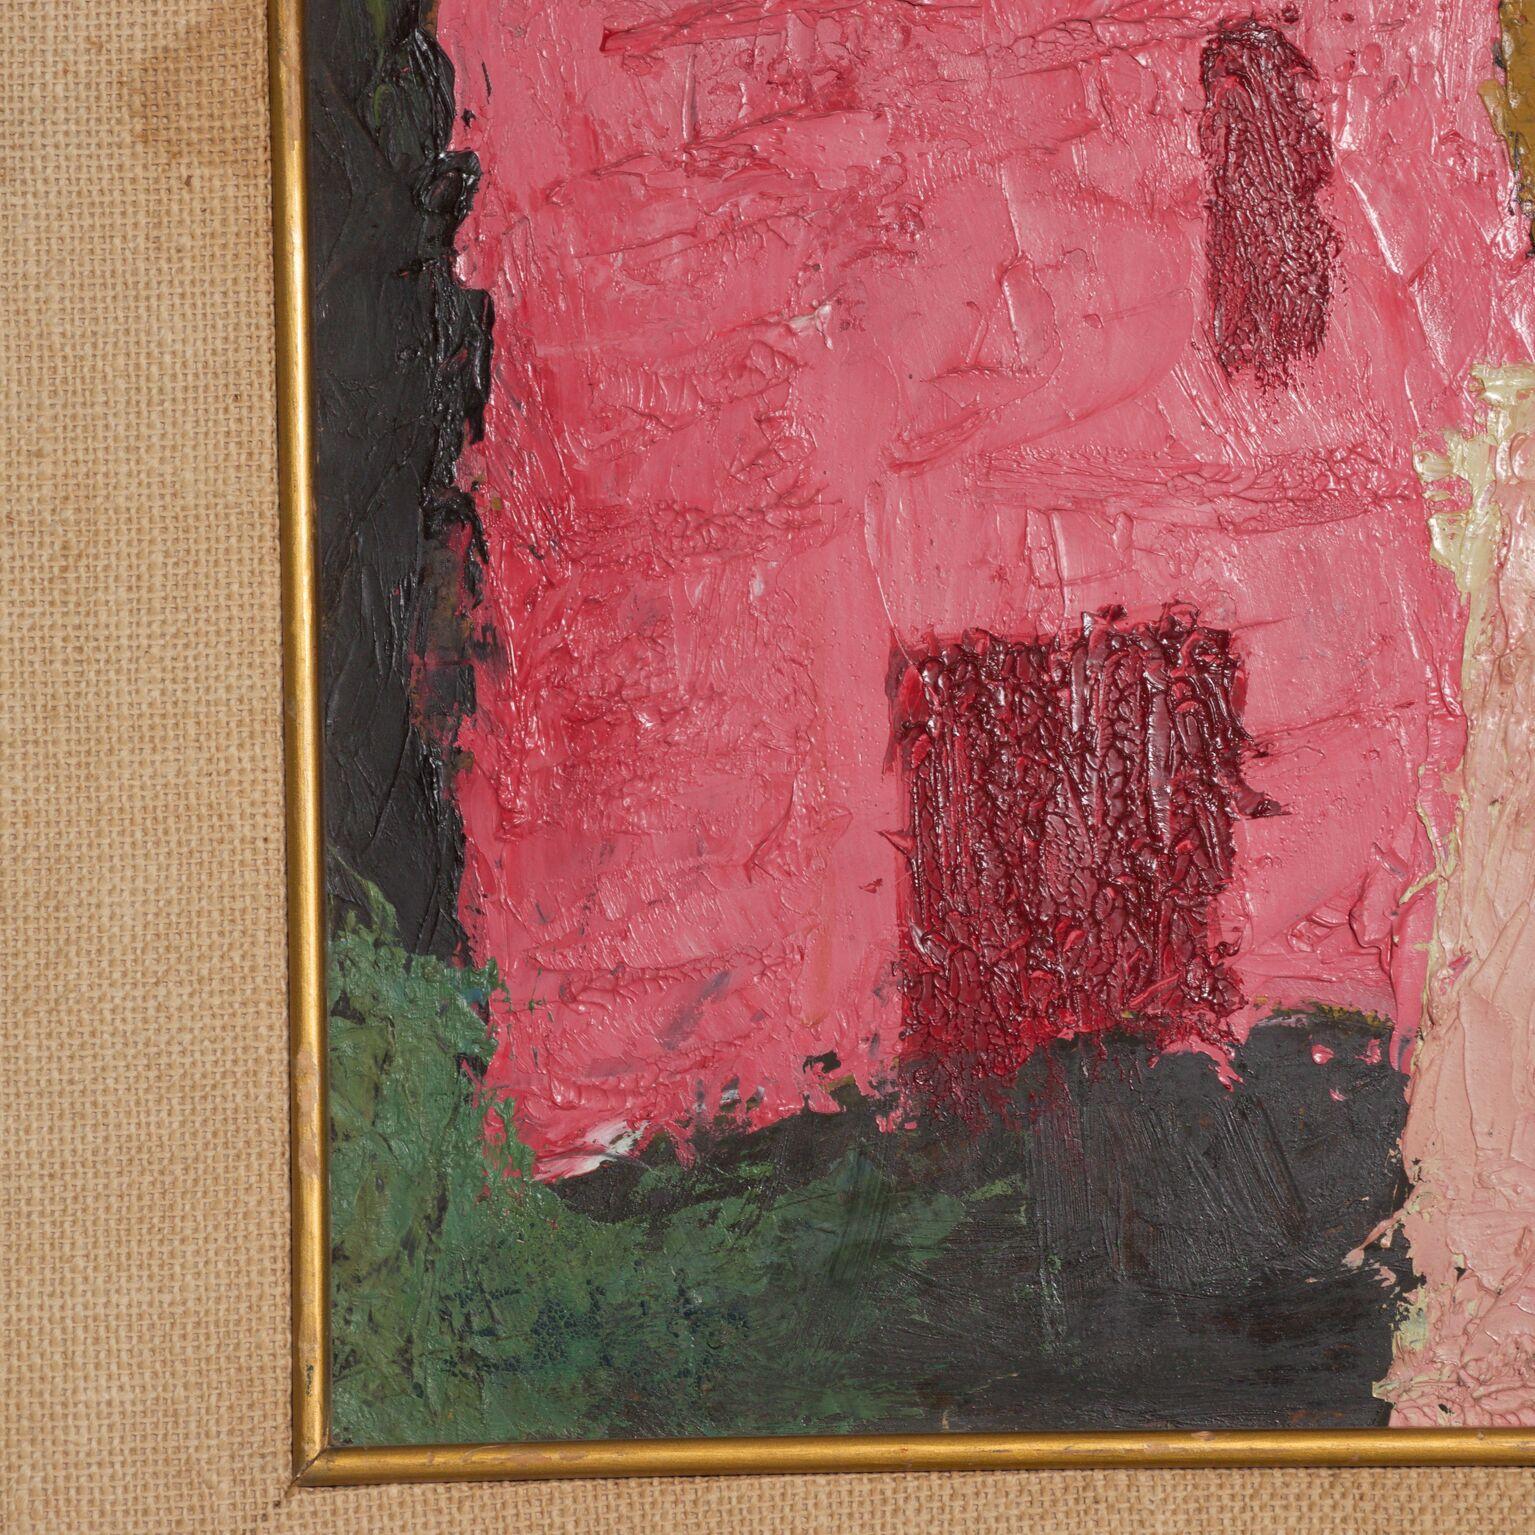 Late 20th Century 1980s Mexico Modernism in Pink Abstract Art Oil on Canvas Pedro Coronel Style